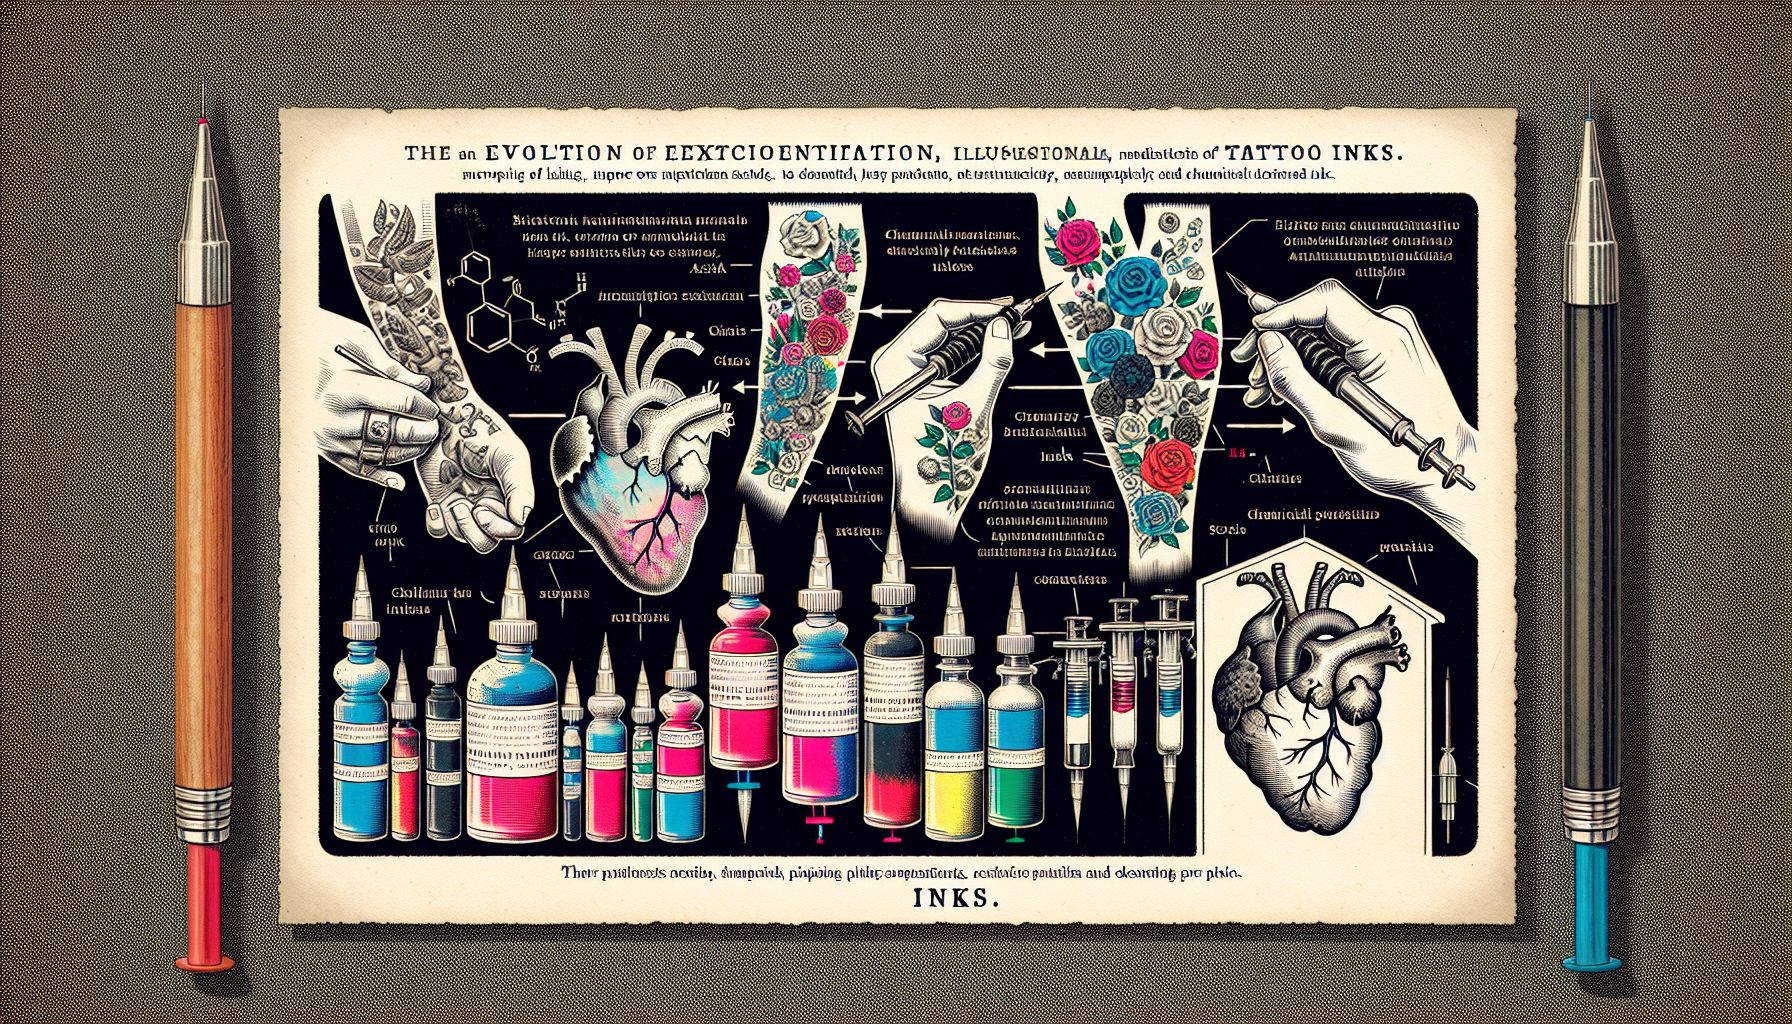 ###A Deep Dive into Evolution, Functionality, and Variation of Tattoo Inks